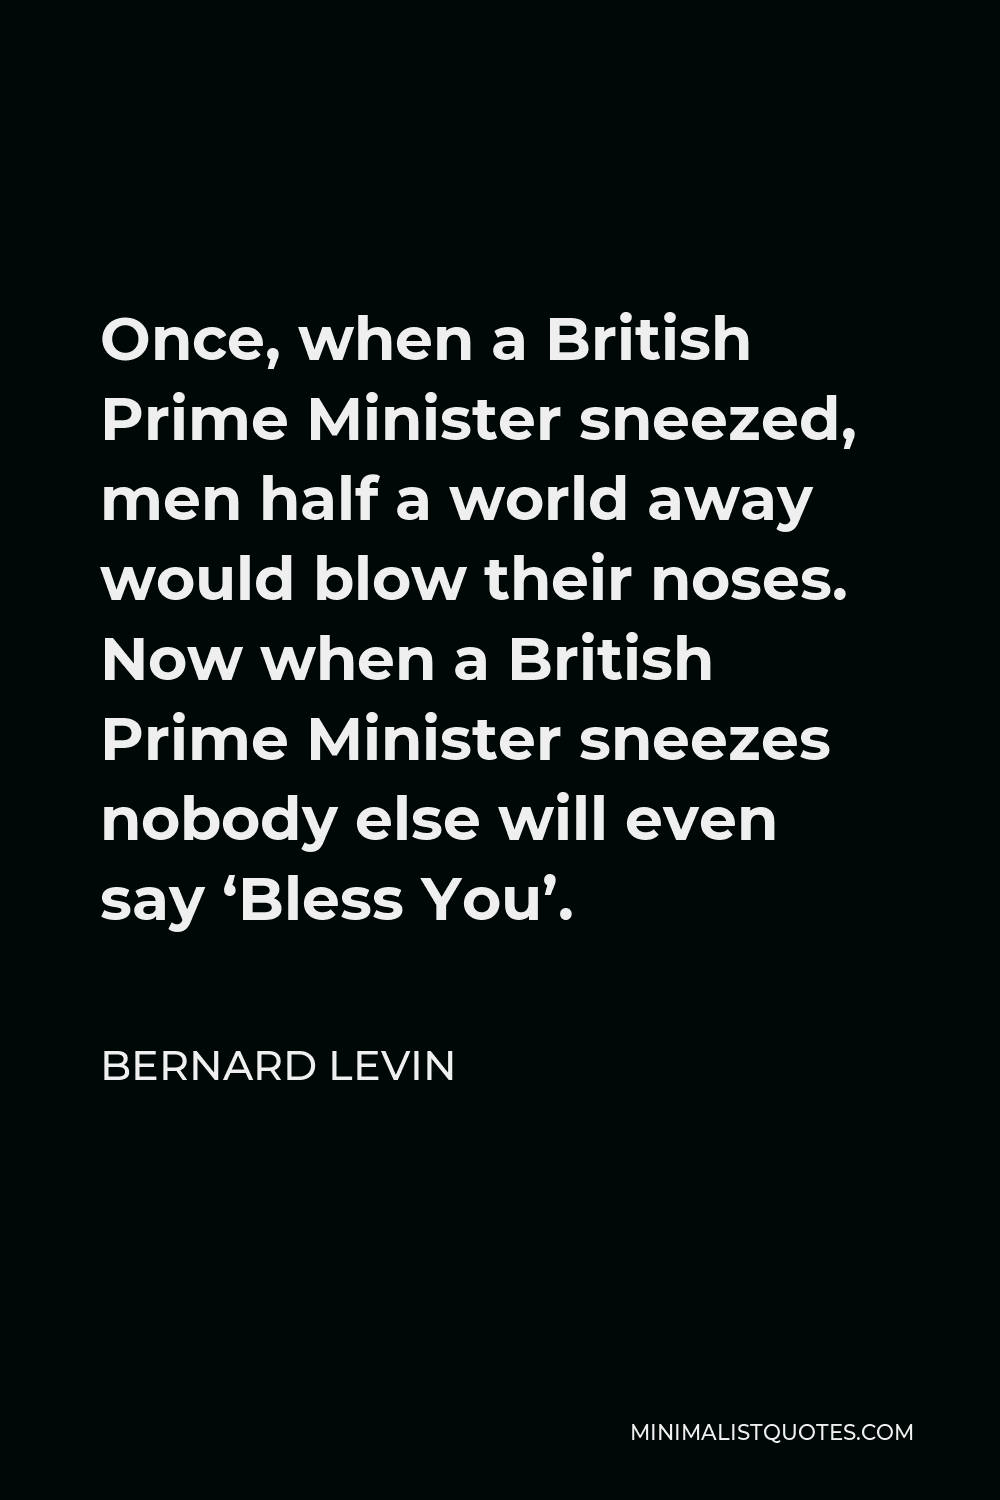 Bernard Levin Quote - Once, when a British Prime Minister sneezed, men half a world away would blow their noses. Now when a British Prime Minister sneezes nobody else will even say ‘Bless You’.